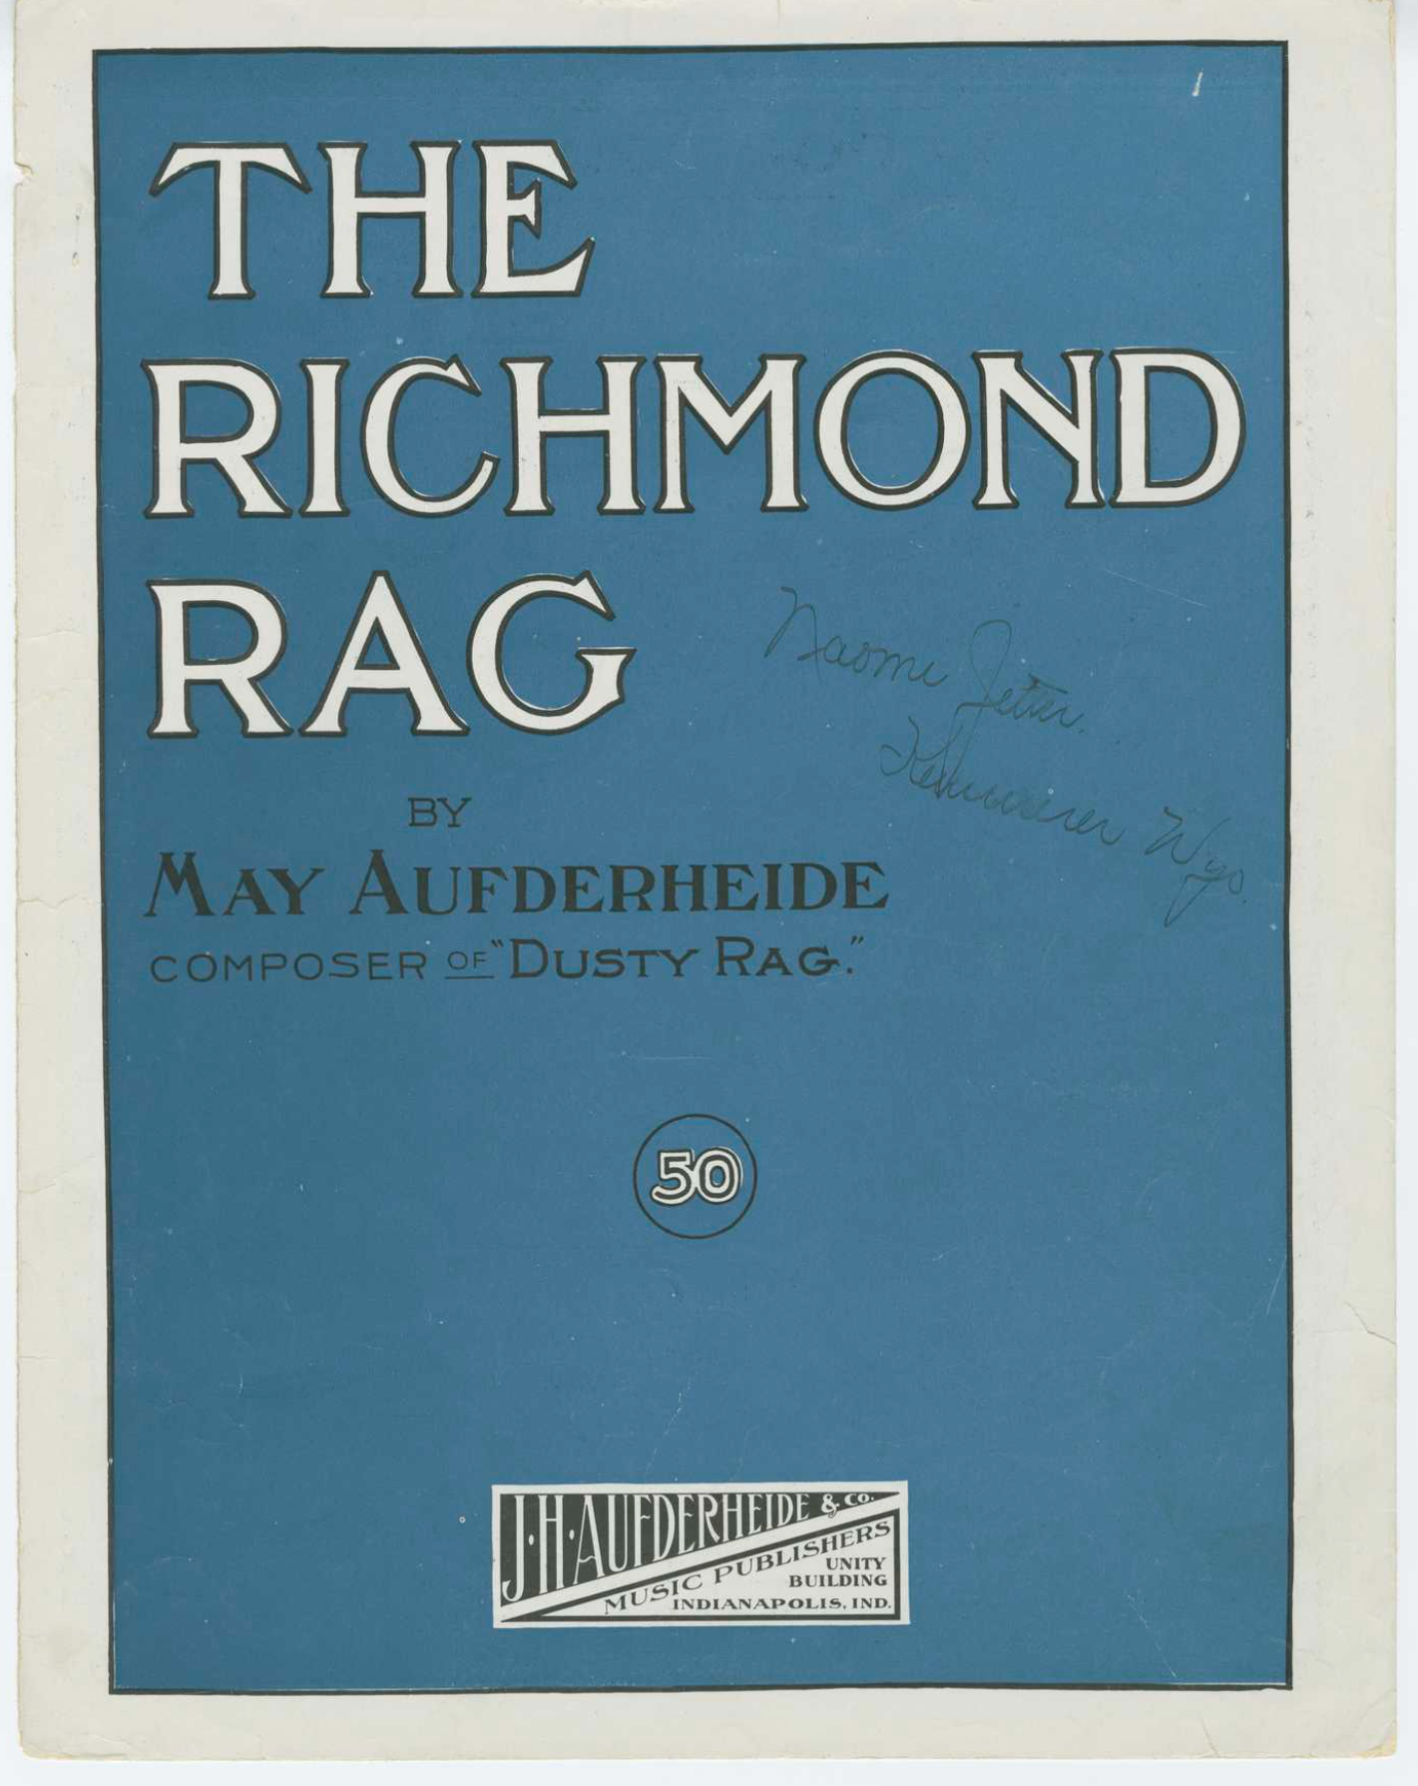 A cover of sheet music.